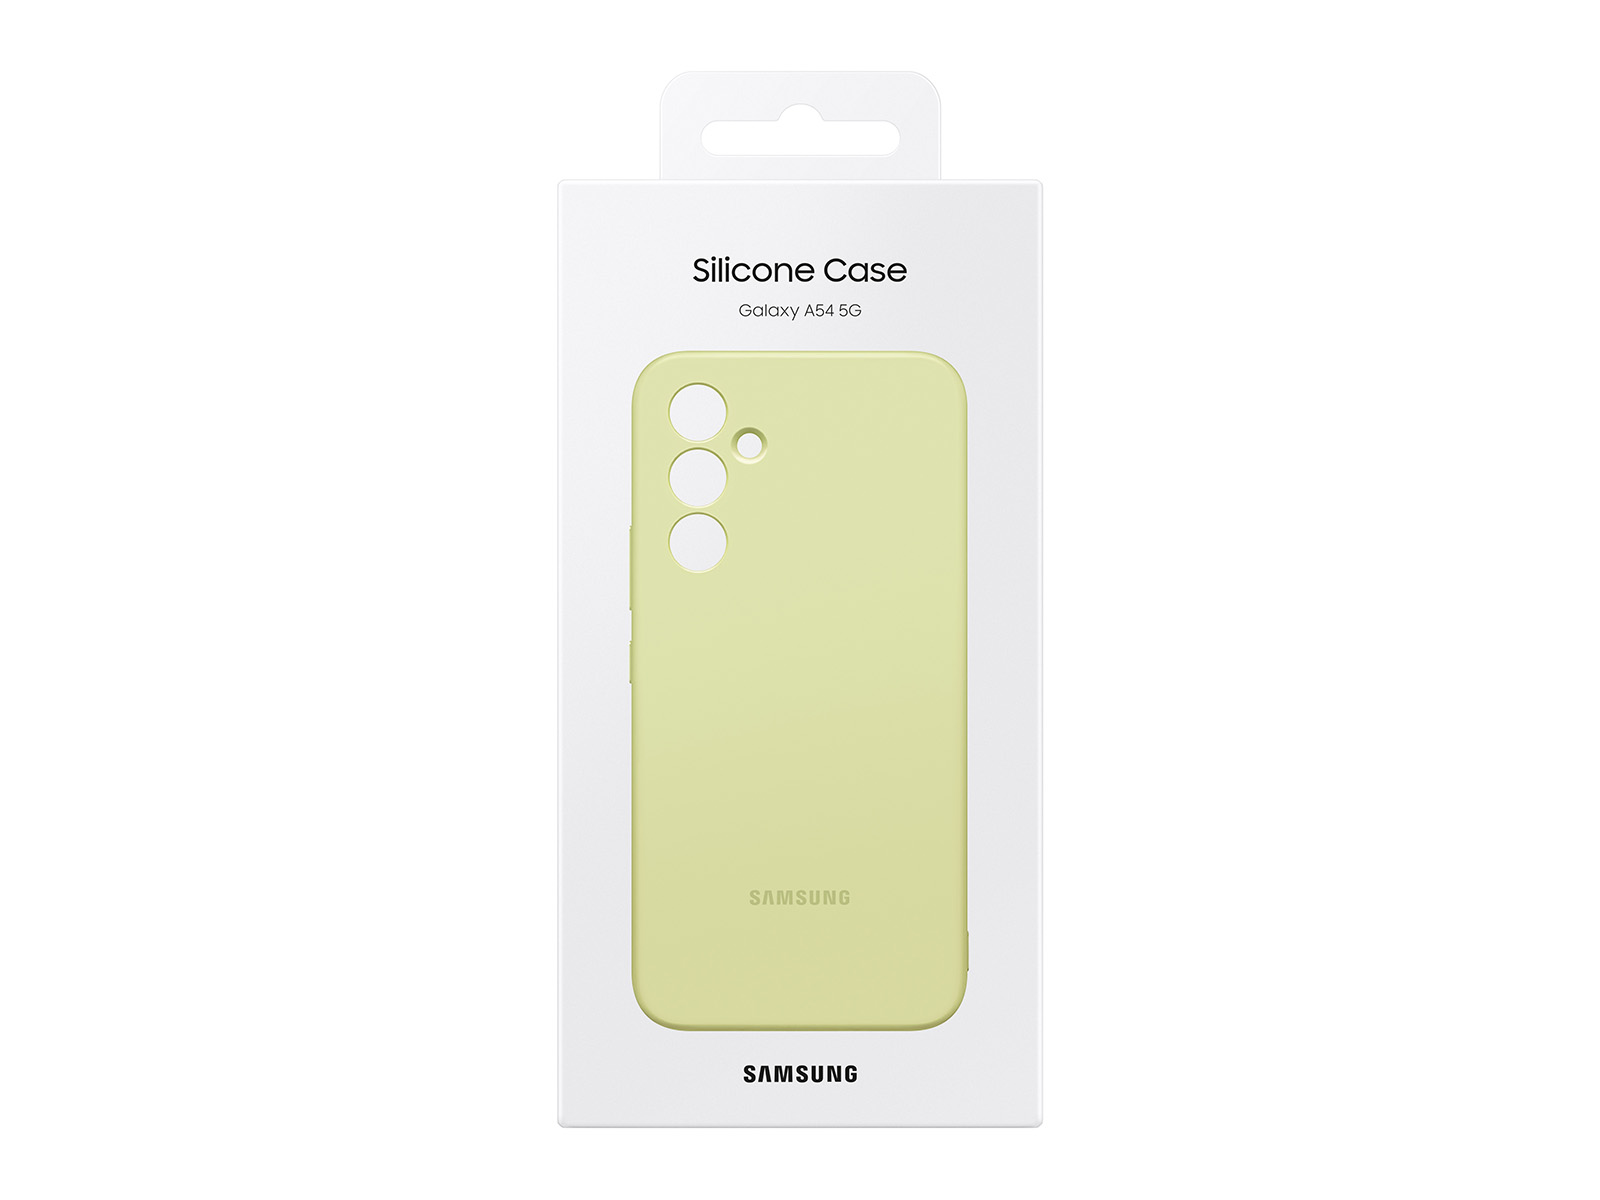 https://image-us.samsung.com/SamsungUS/home/mobile/mobile-accessories/phones/03102023/silicone_case_lime/SDSAC-5611-EF-PA546T_007_Package_Lime-1600x1200.jpg?$product-details-jpg$